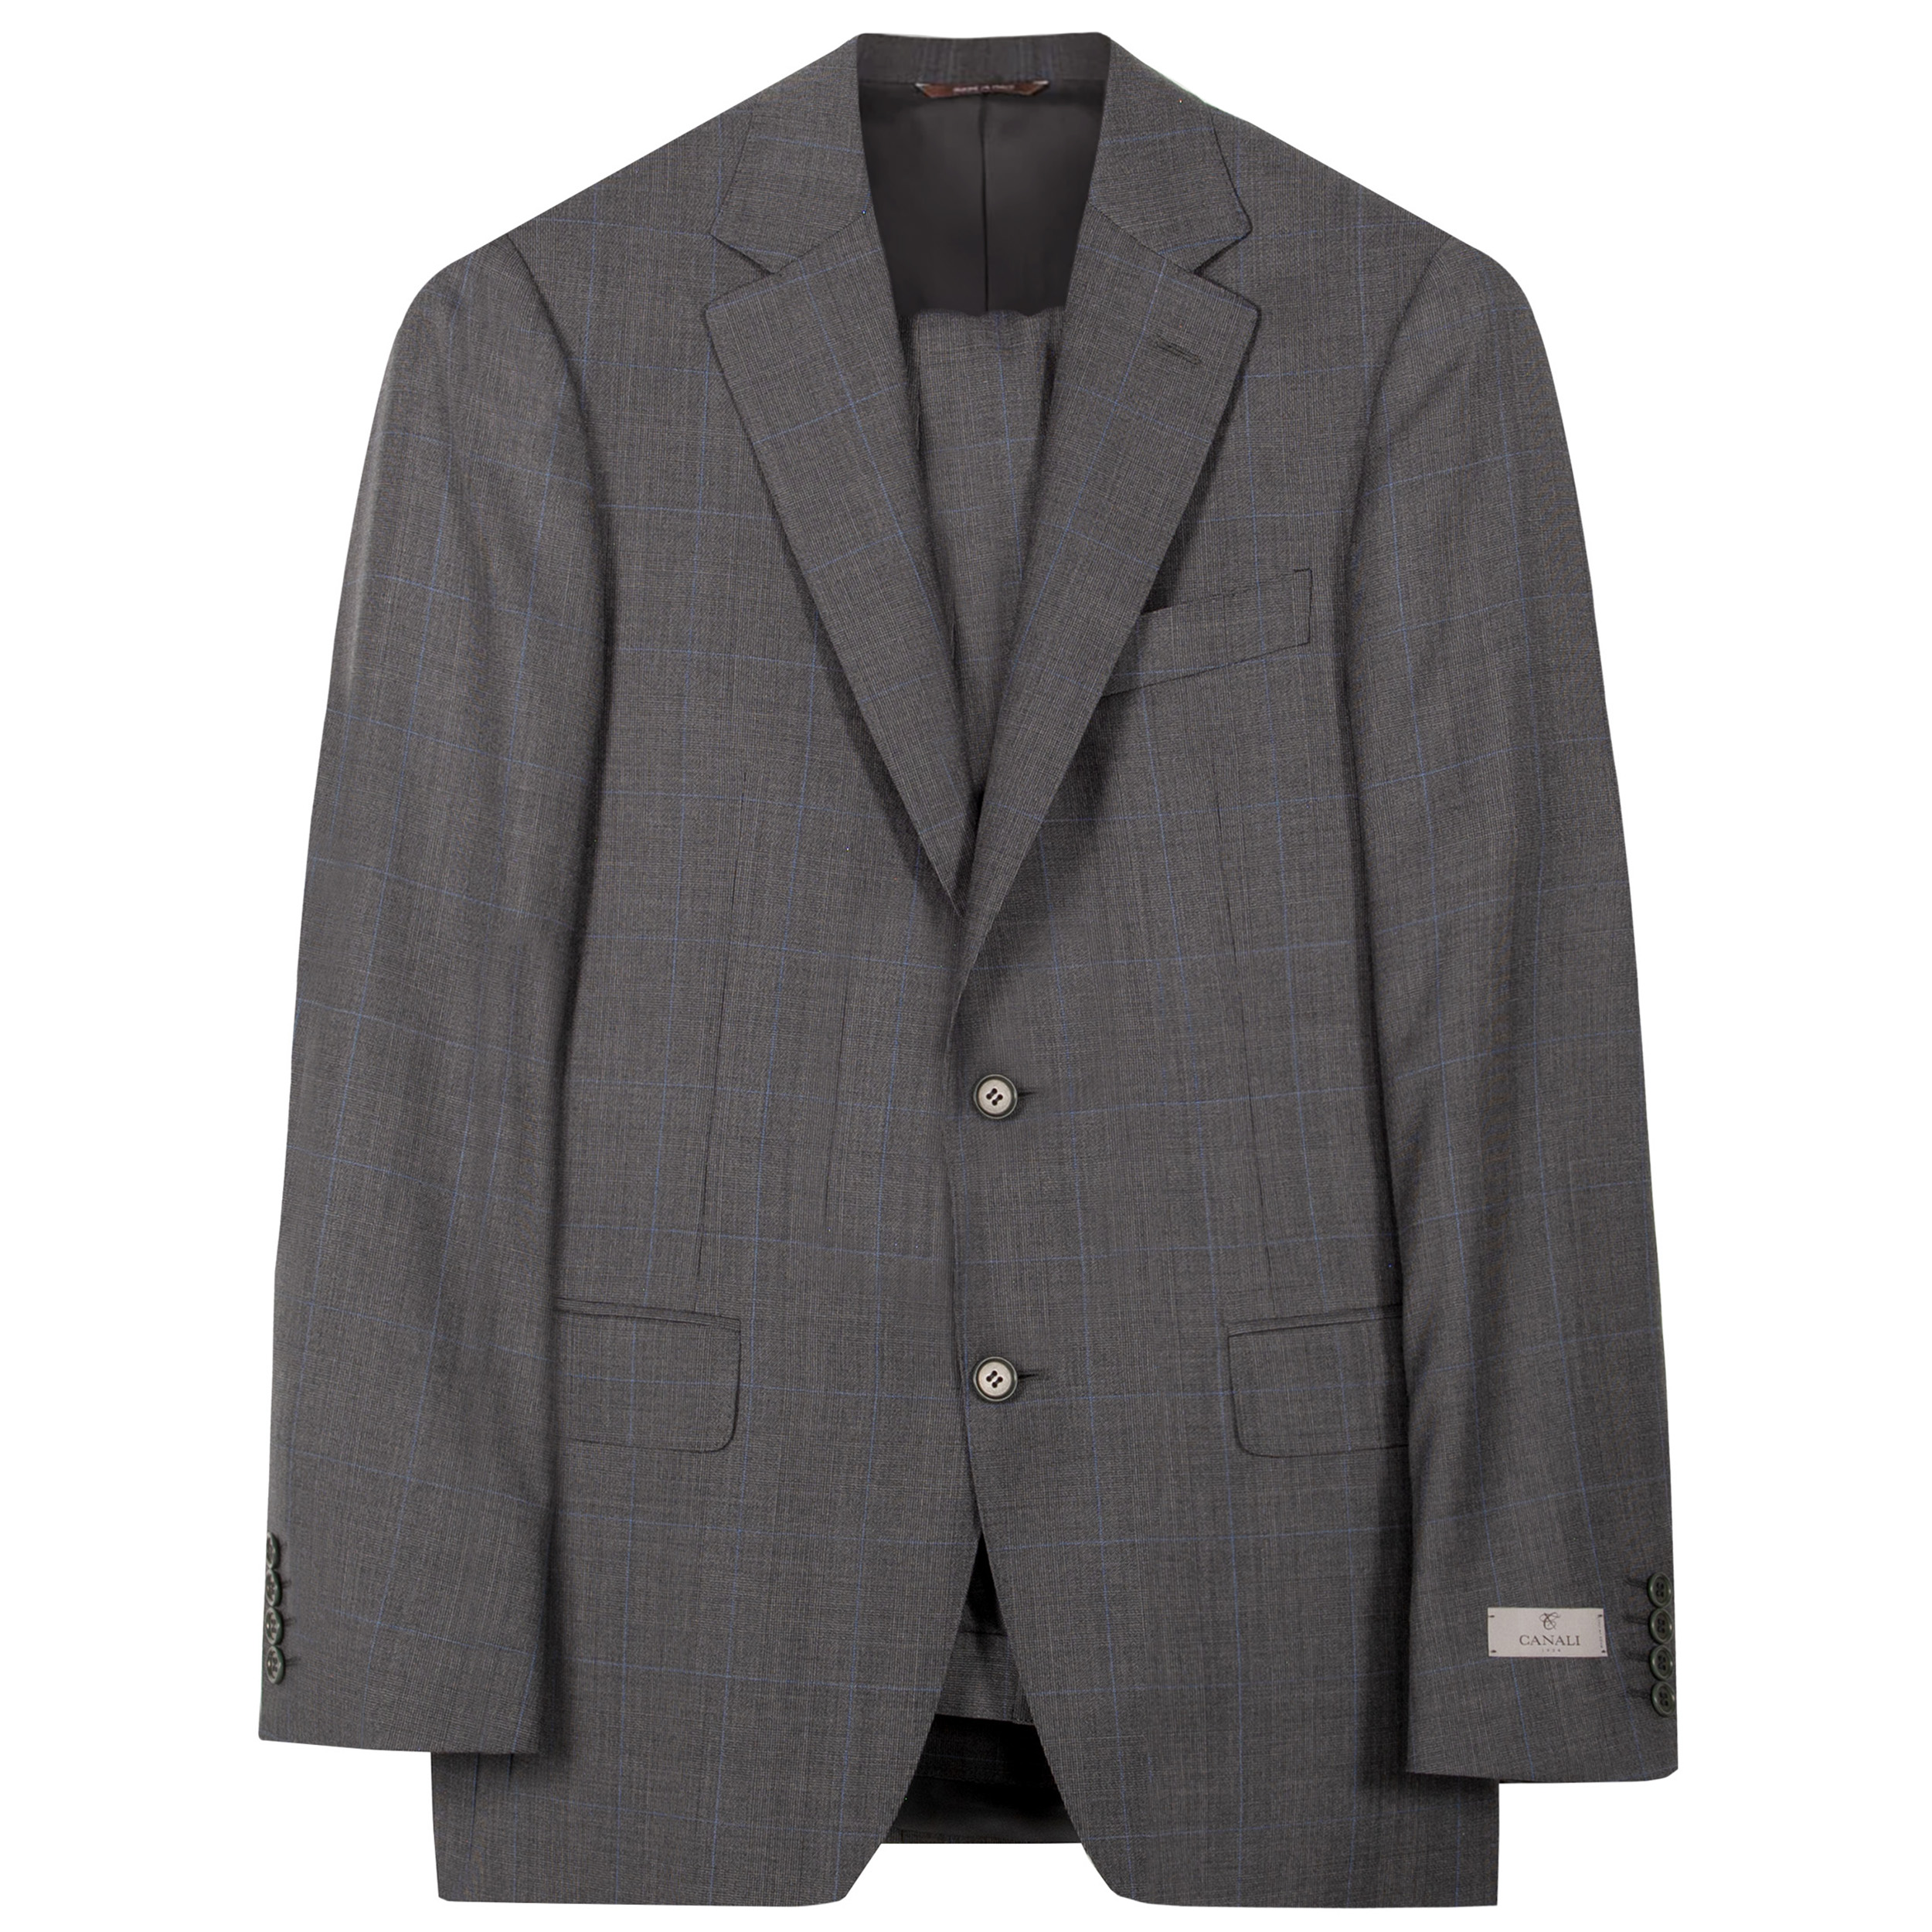 Canali Kei Check Wool Suit Charcoal